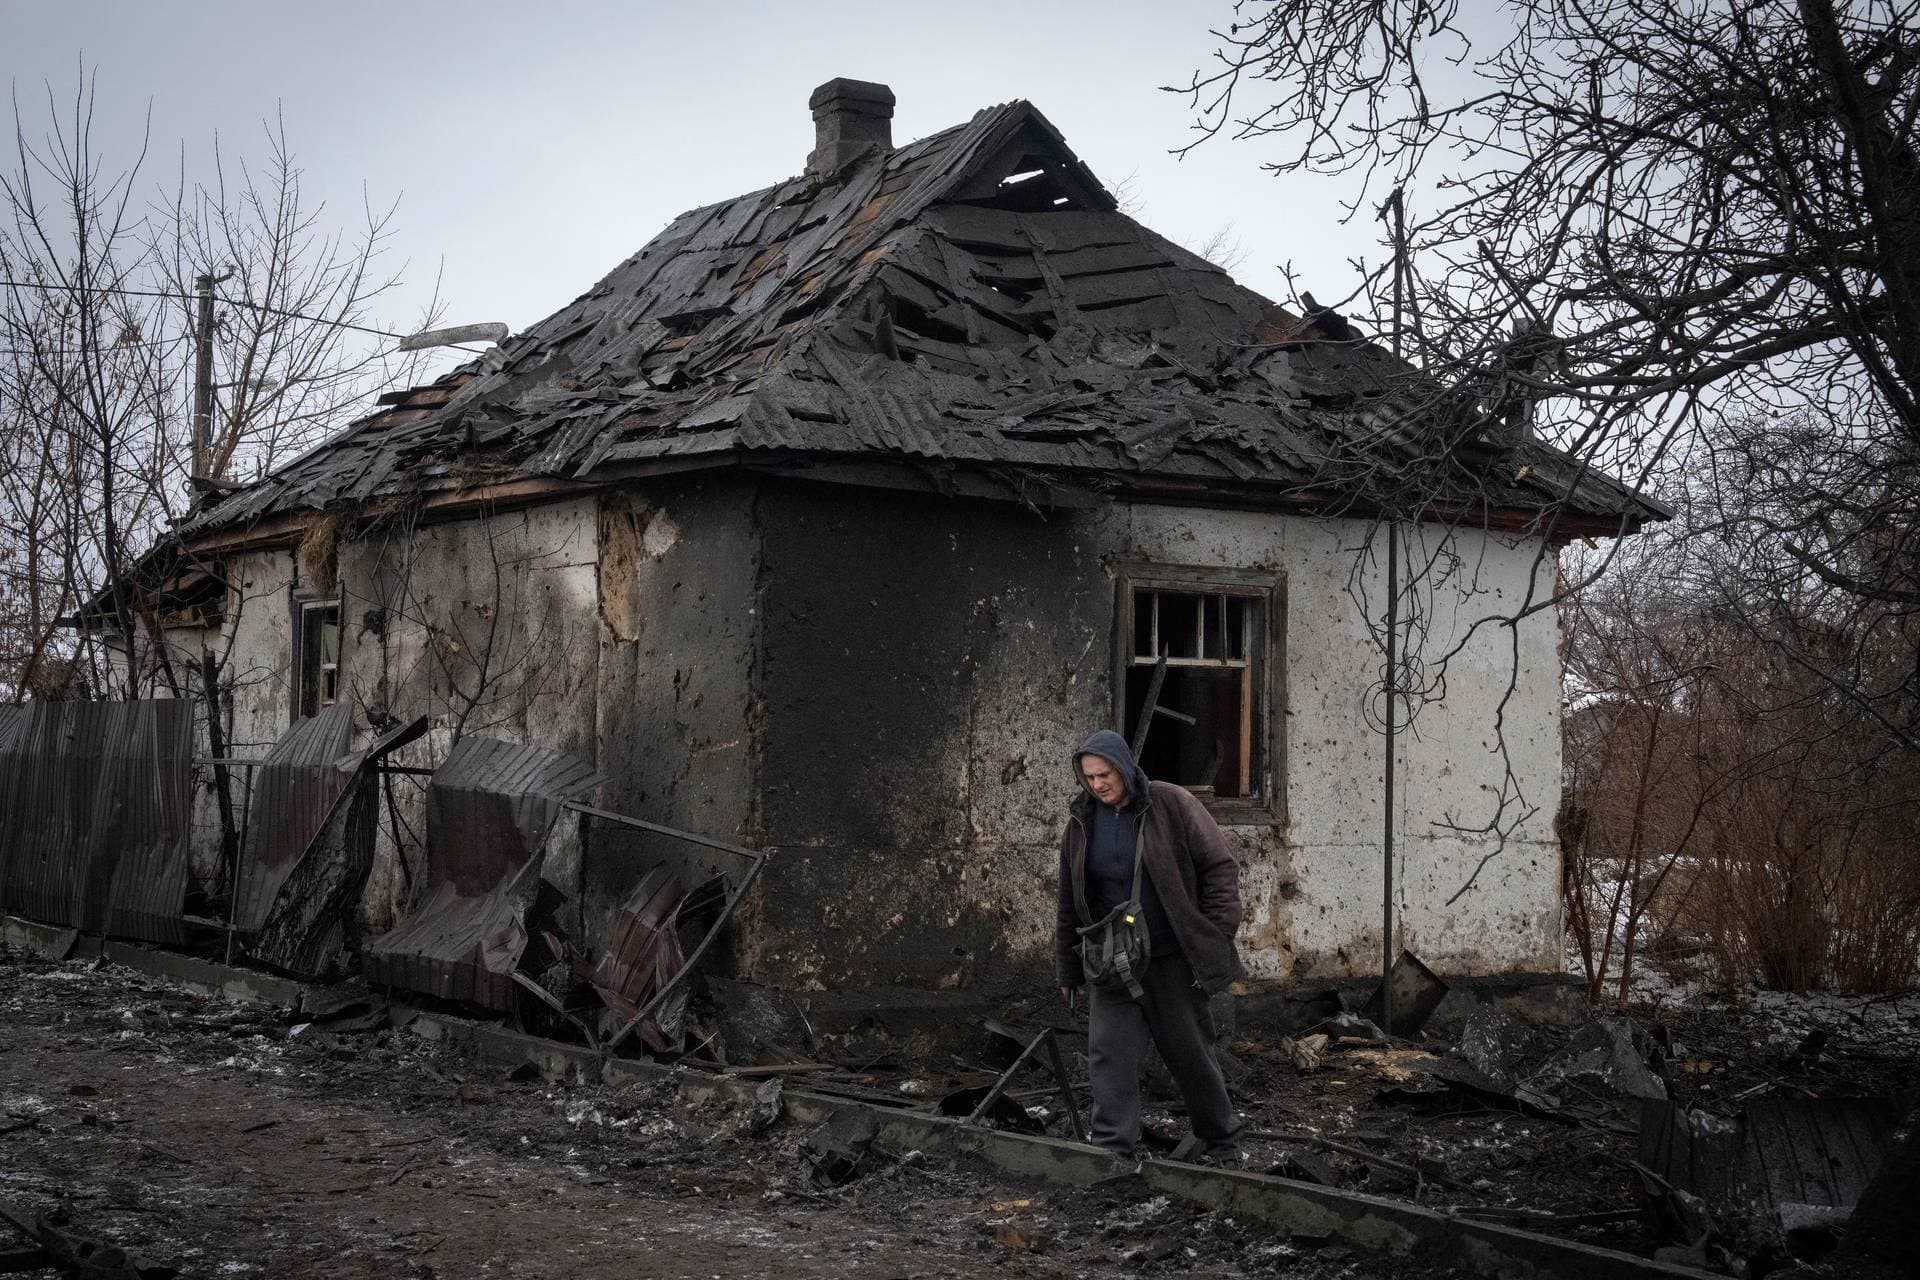 A local resident passes by a private house damaged in the Russian missile attack in Kyiv